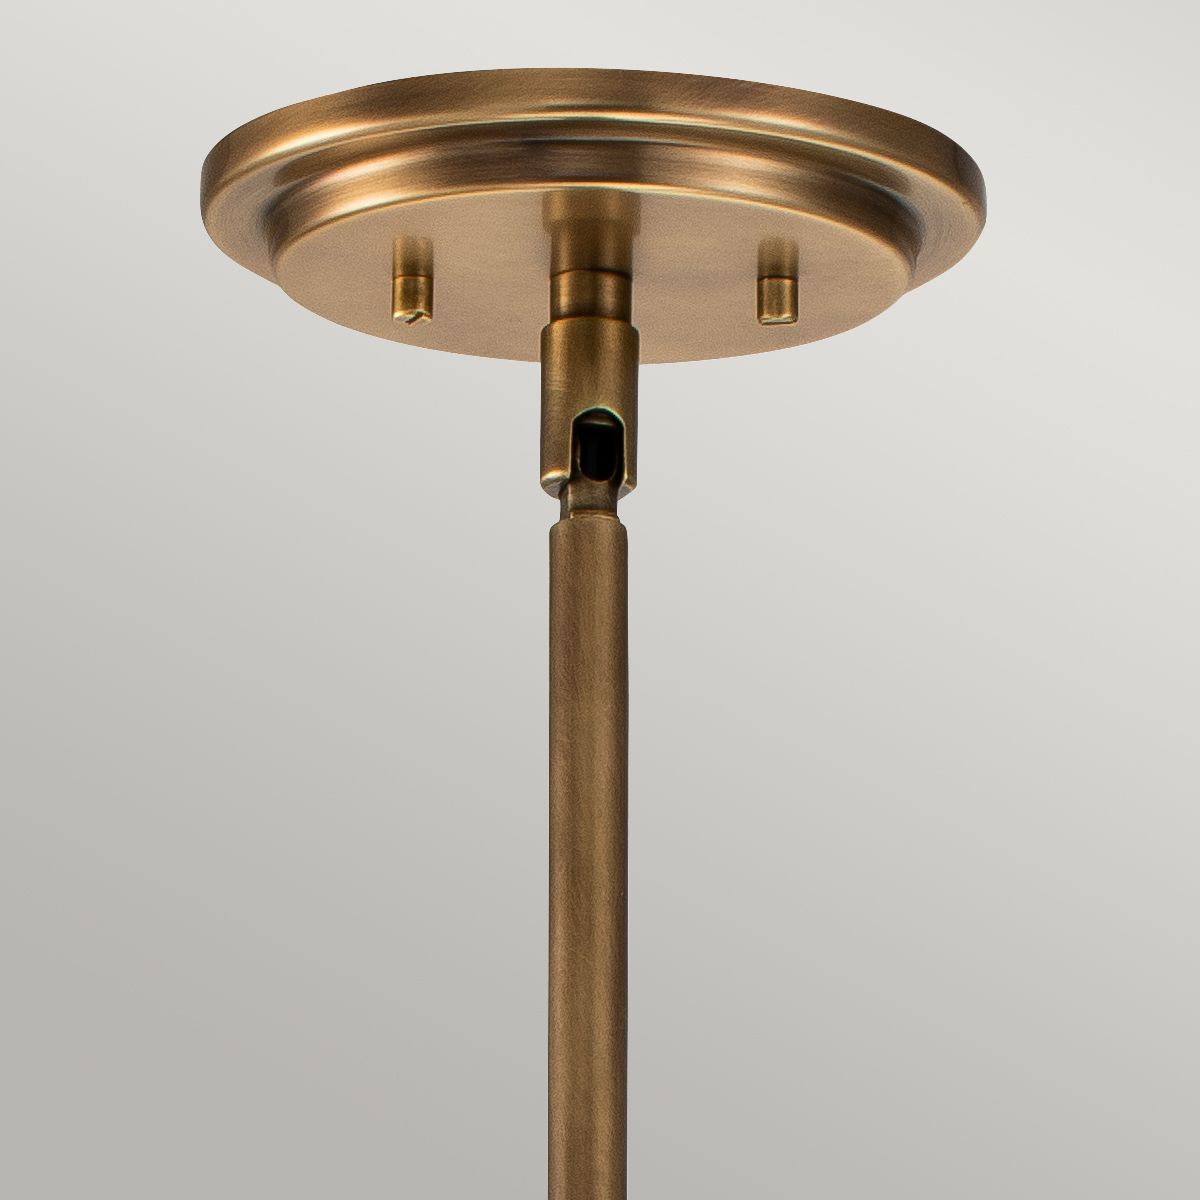 Ceiling Pendant In Heritage Brass With Clear Glass - Medium